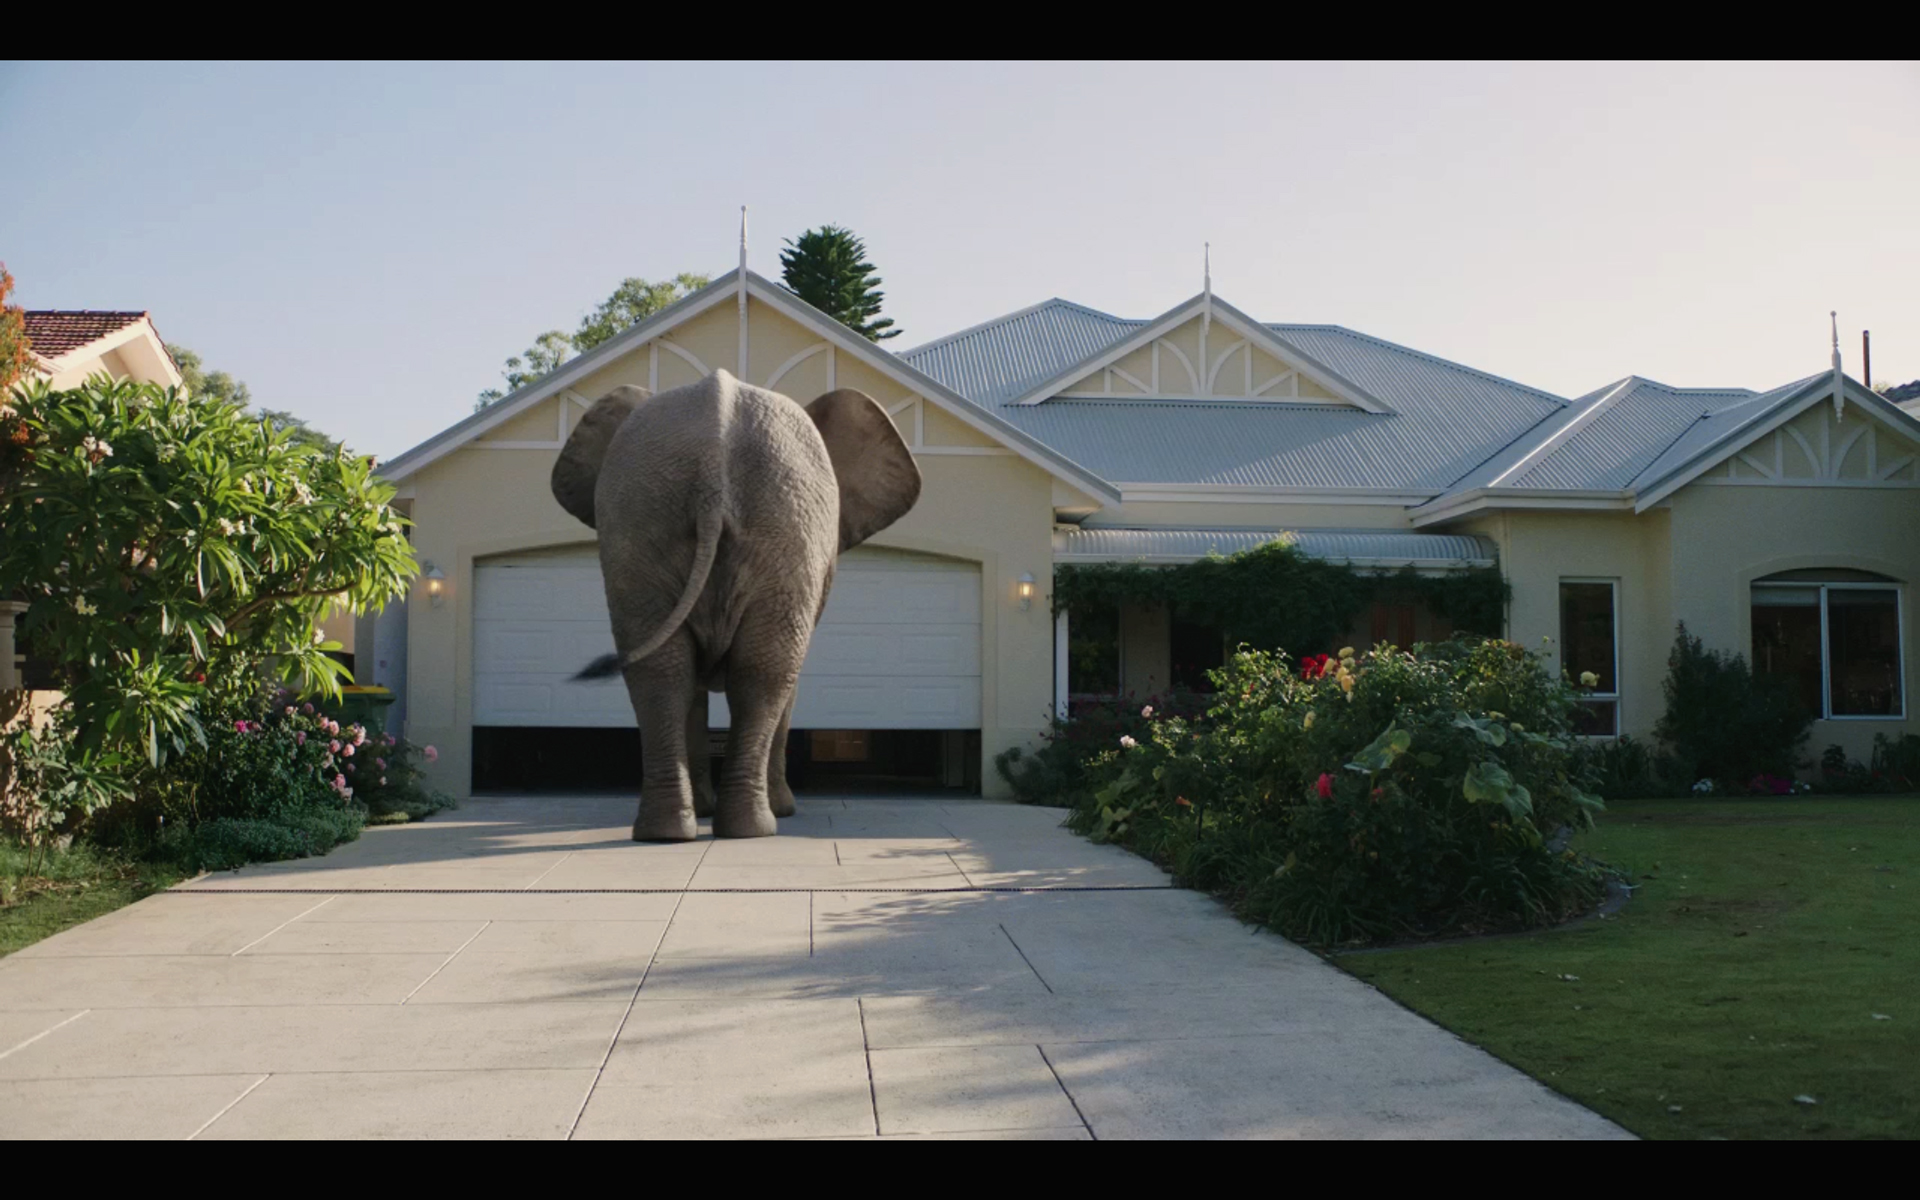 Video: There is an elephant in the driveway!